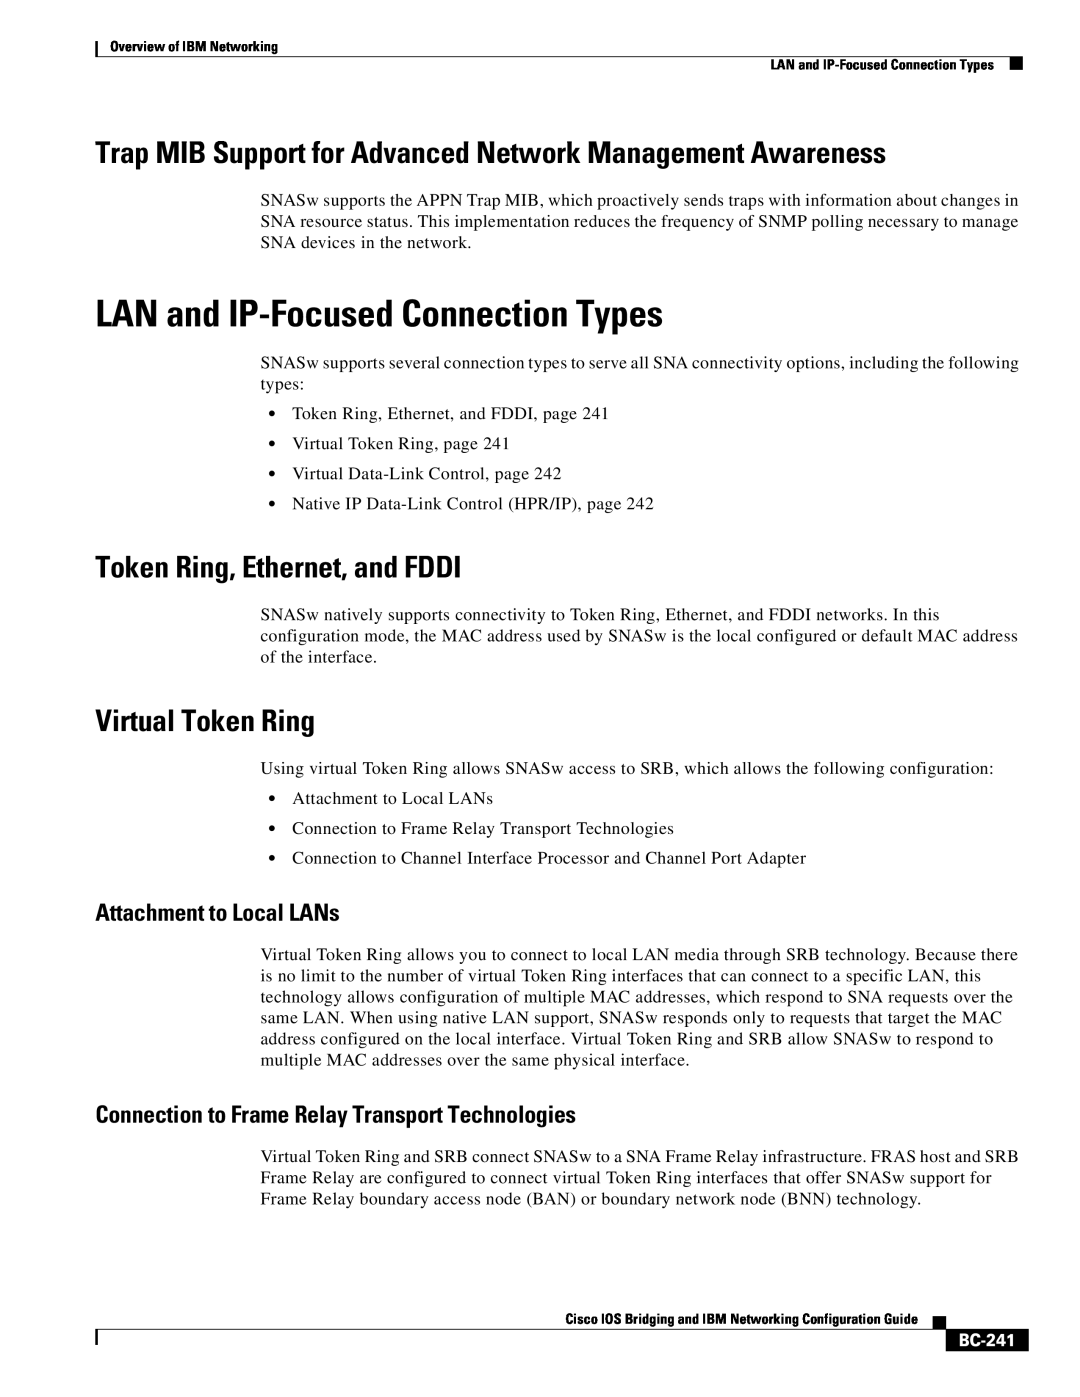 IBM BC-203 manual LAN and IP-Focused Connection Types, Trap MIB Support for Advanced Network Management Awareness, BC-241 